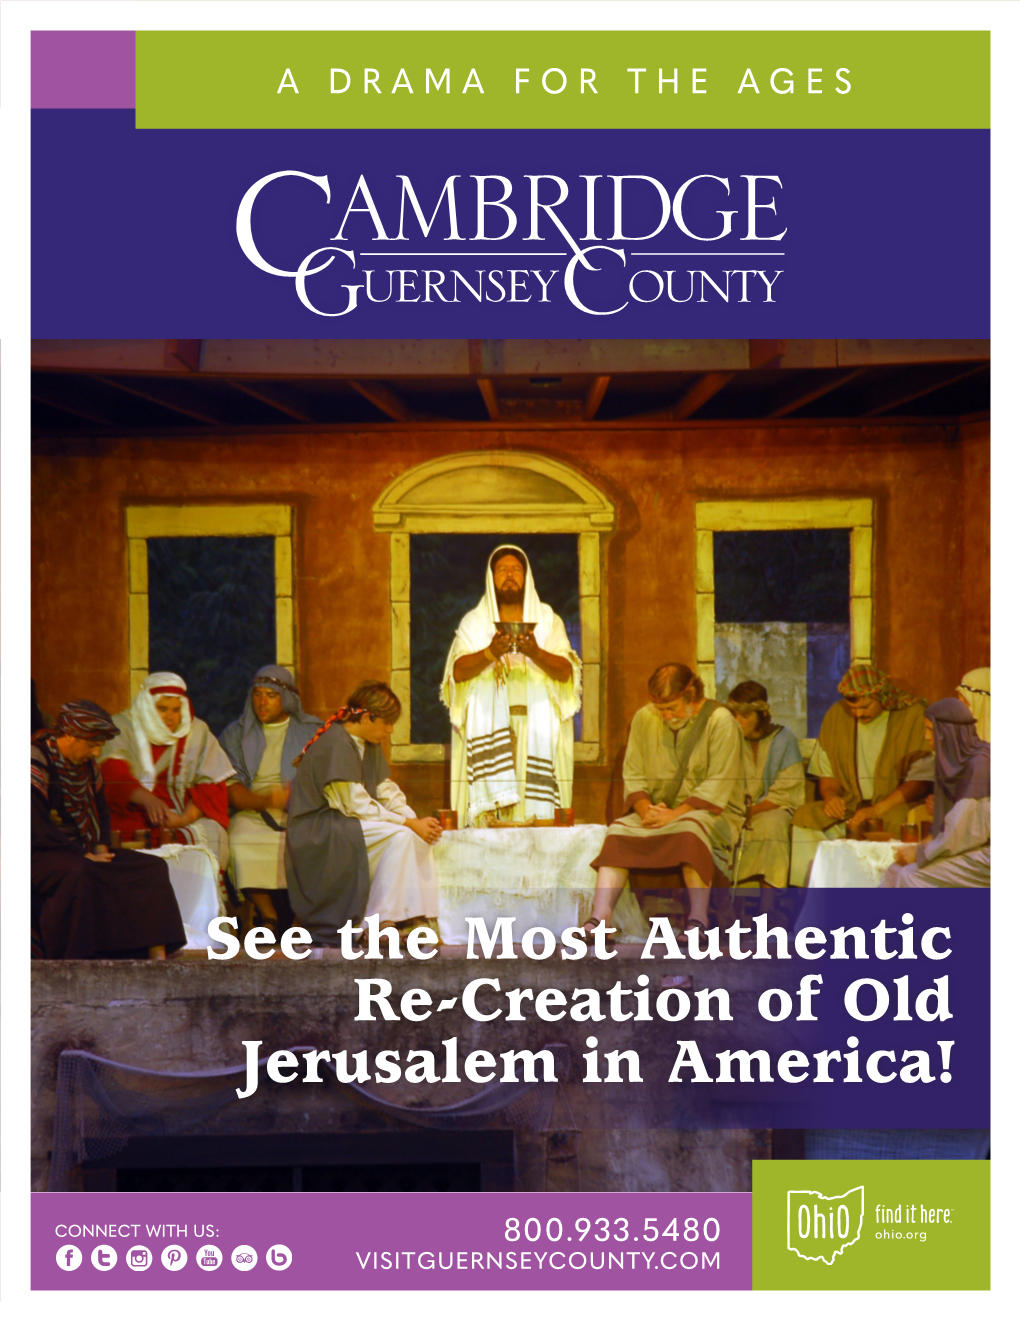 See the Most Authentic Re-Creation of Old Jerusalem in America!